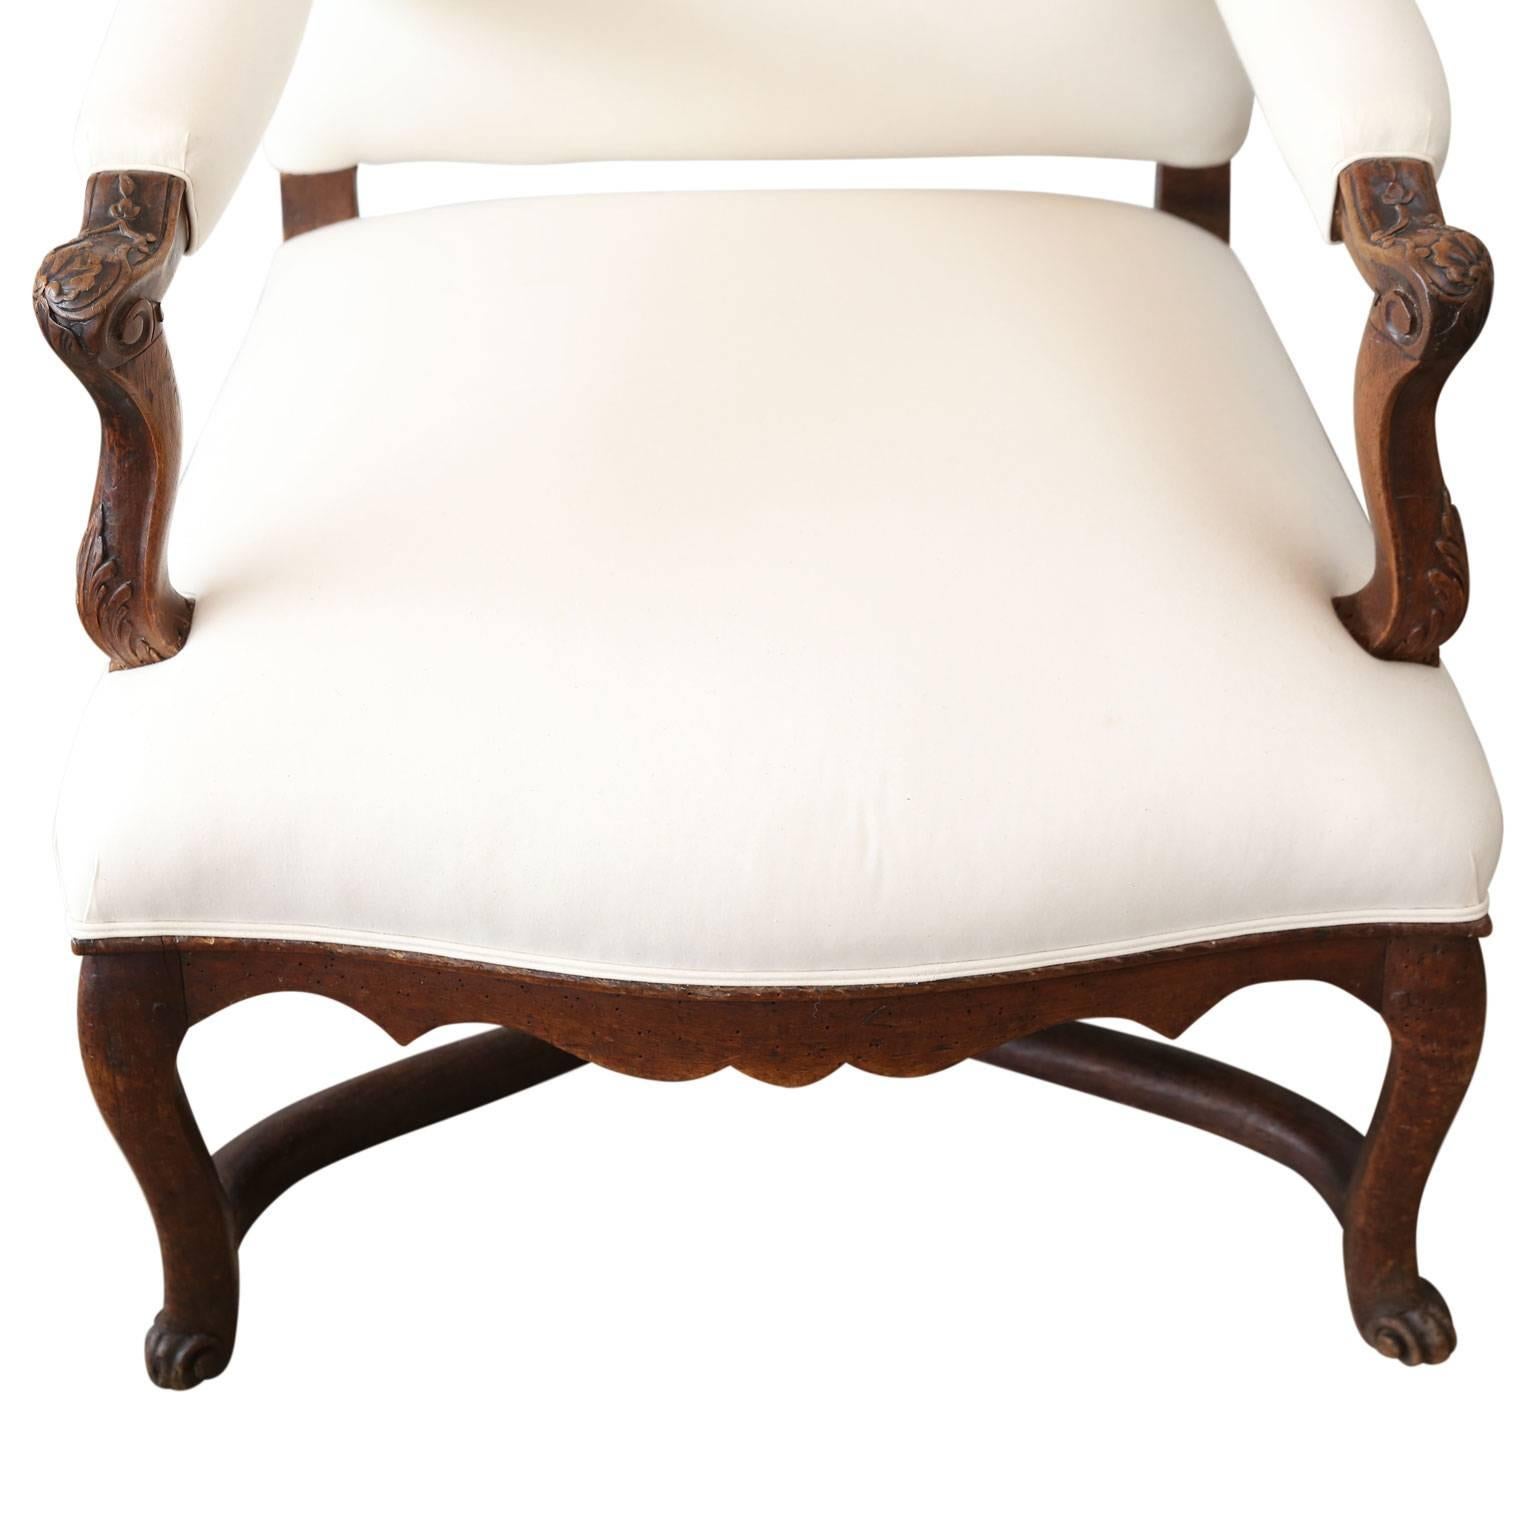 Hand-Carved 18th Century Régence Fauteuil